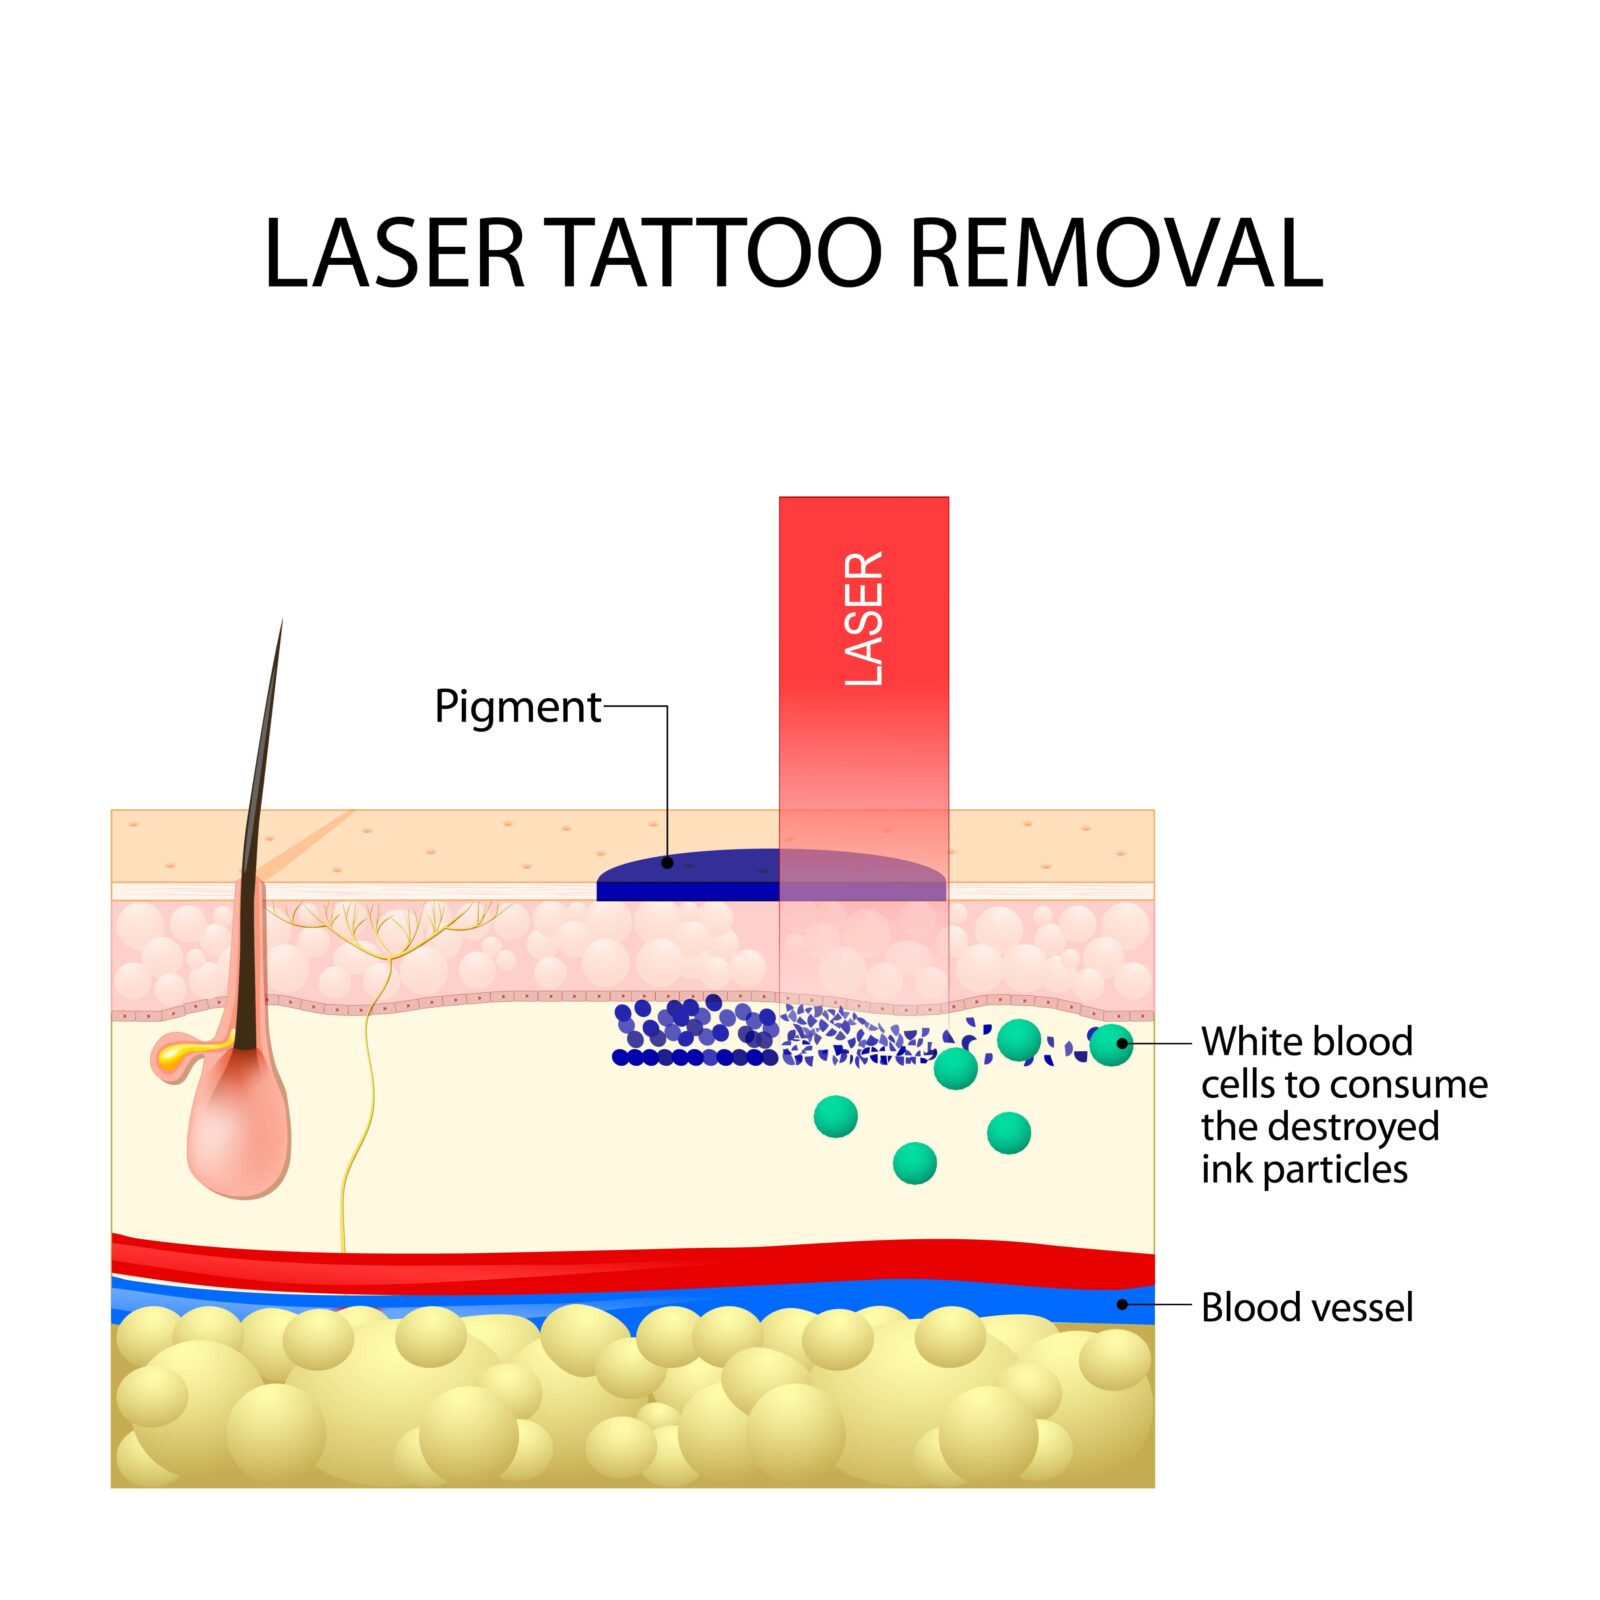 Laser tattoo removal. Dark ink absorb light and break down. White blood cells to consume the destroyed ink particles and carry them to the liver.